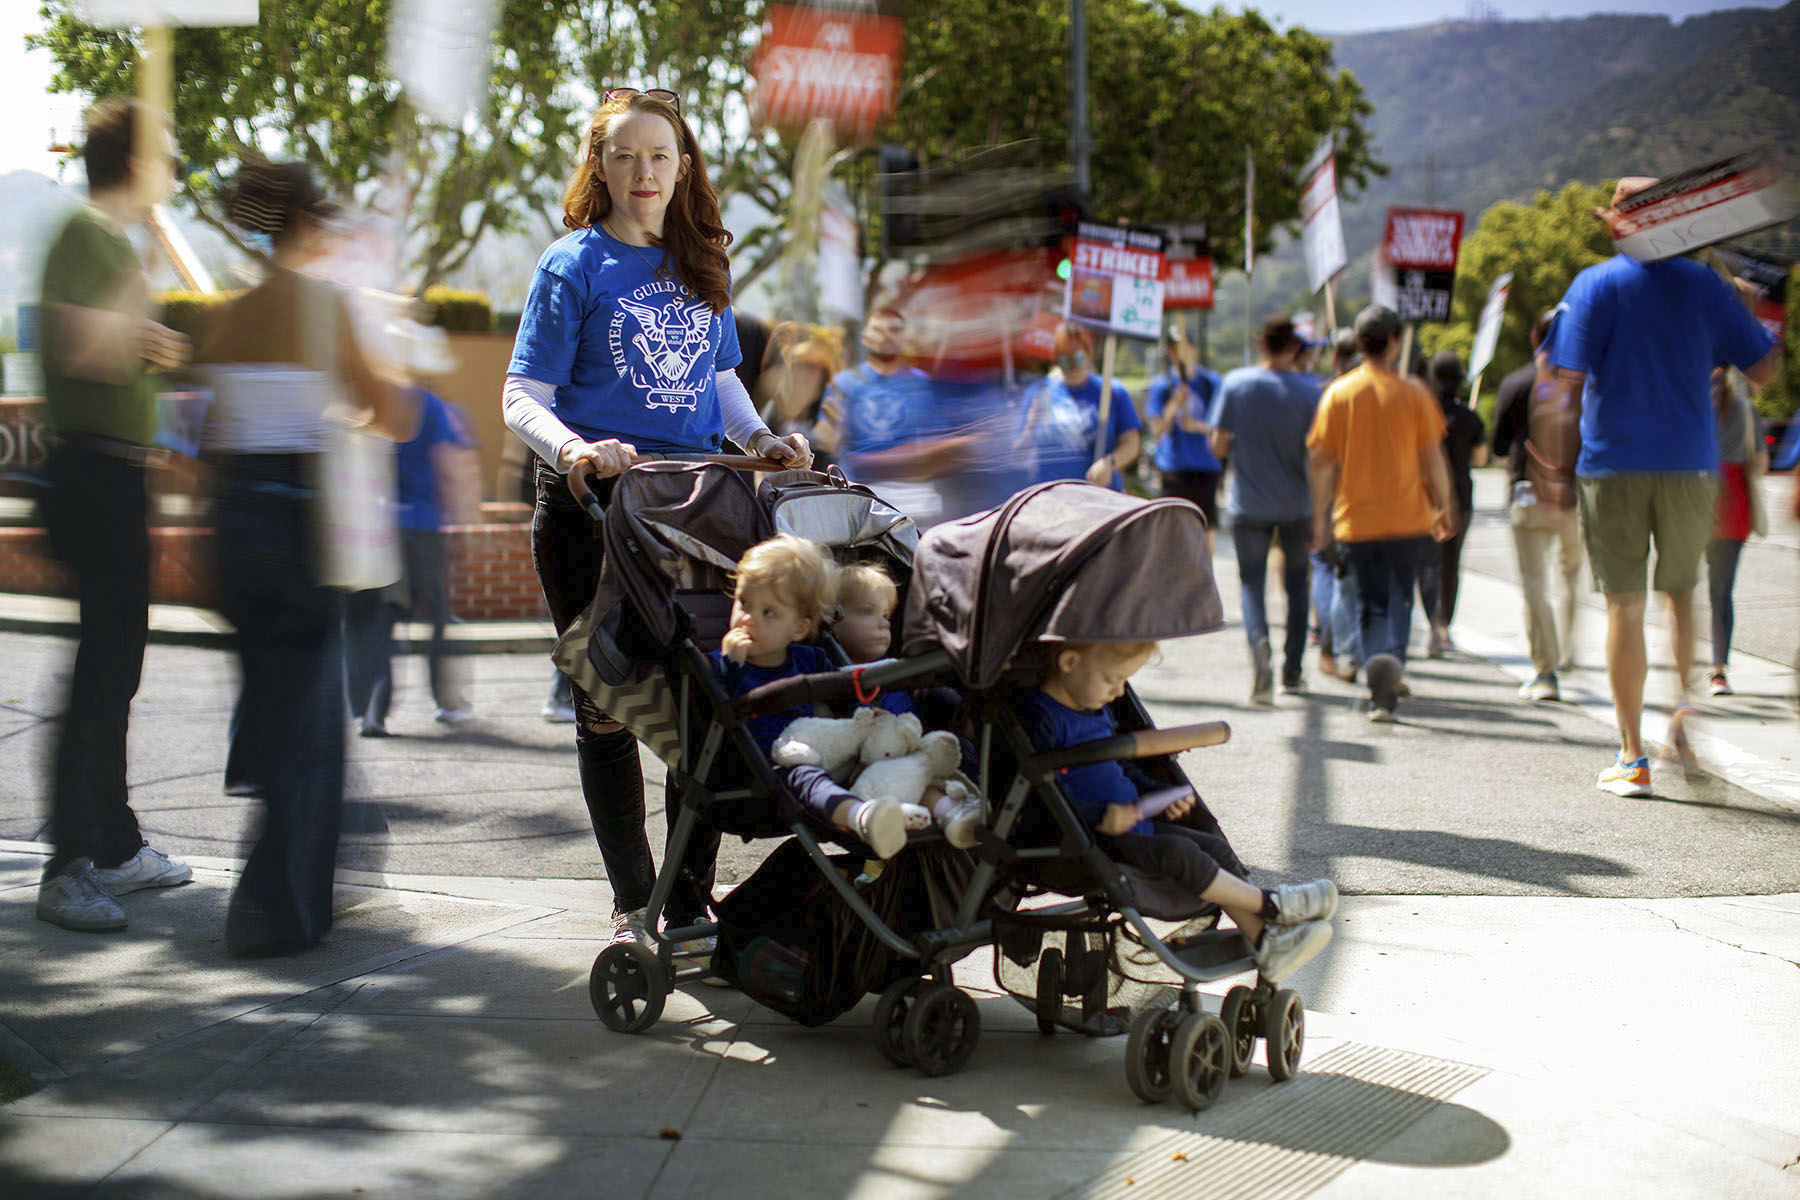 Hollie Overton, member of the Writers Guild of America, poses with her children while on strike near The Walt Disney Studios.